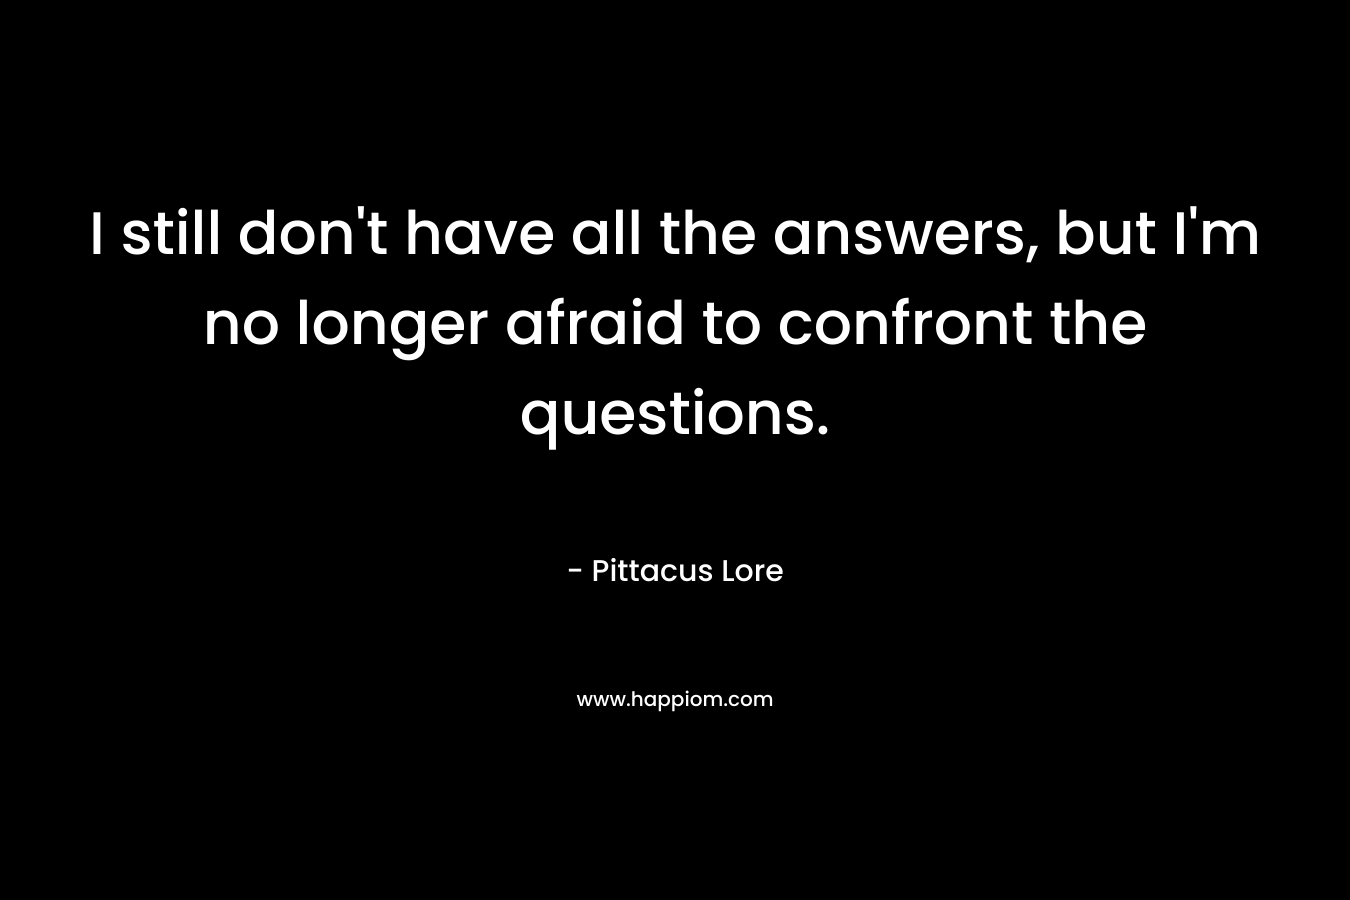 I still don’t have all the answers, but I’m no longer afraid to confront the questions. – Pittacus Lore